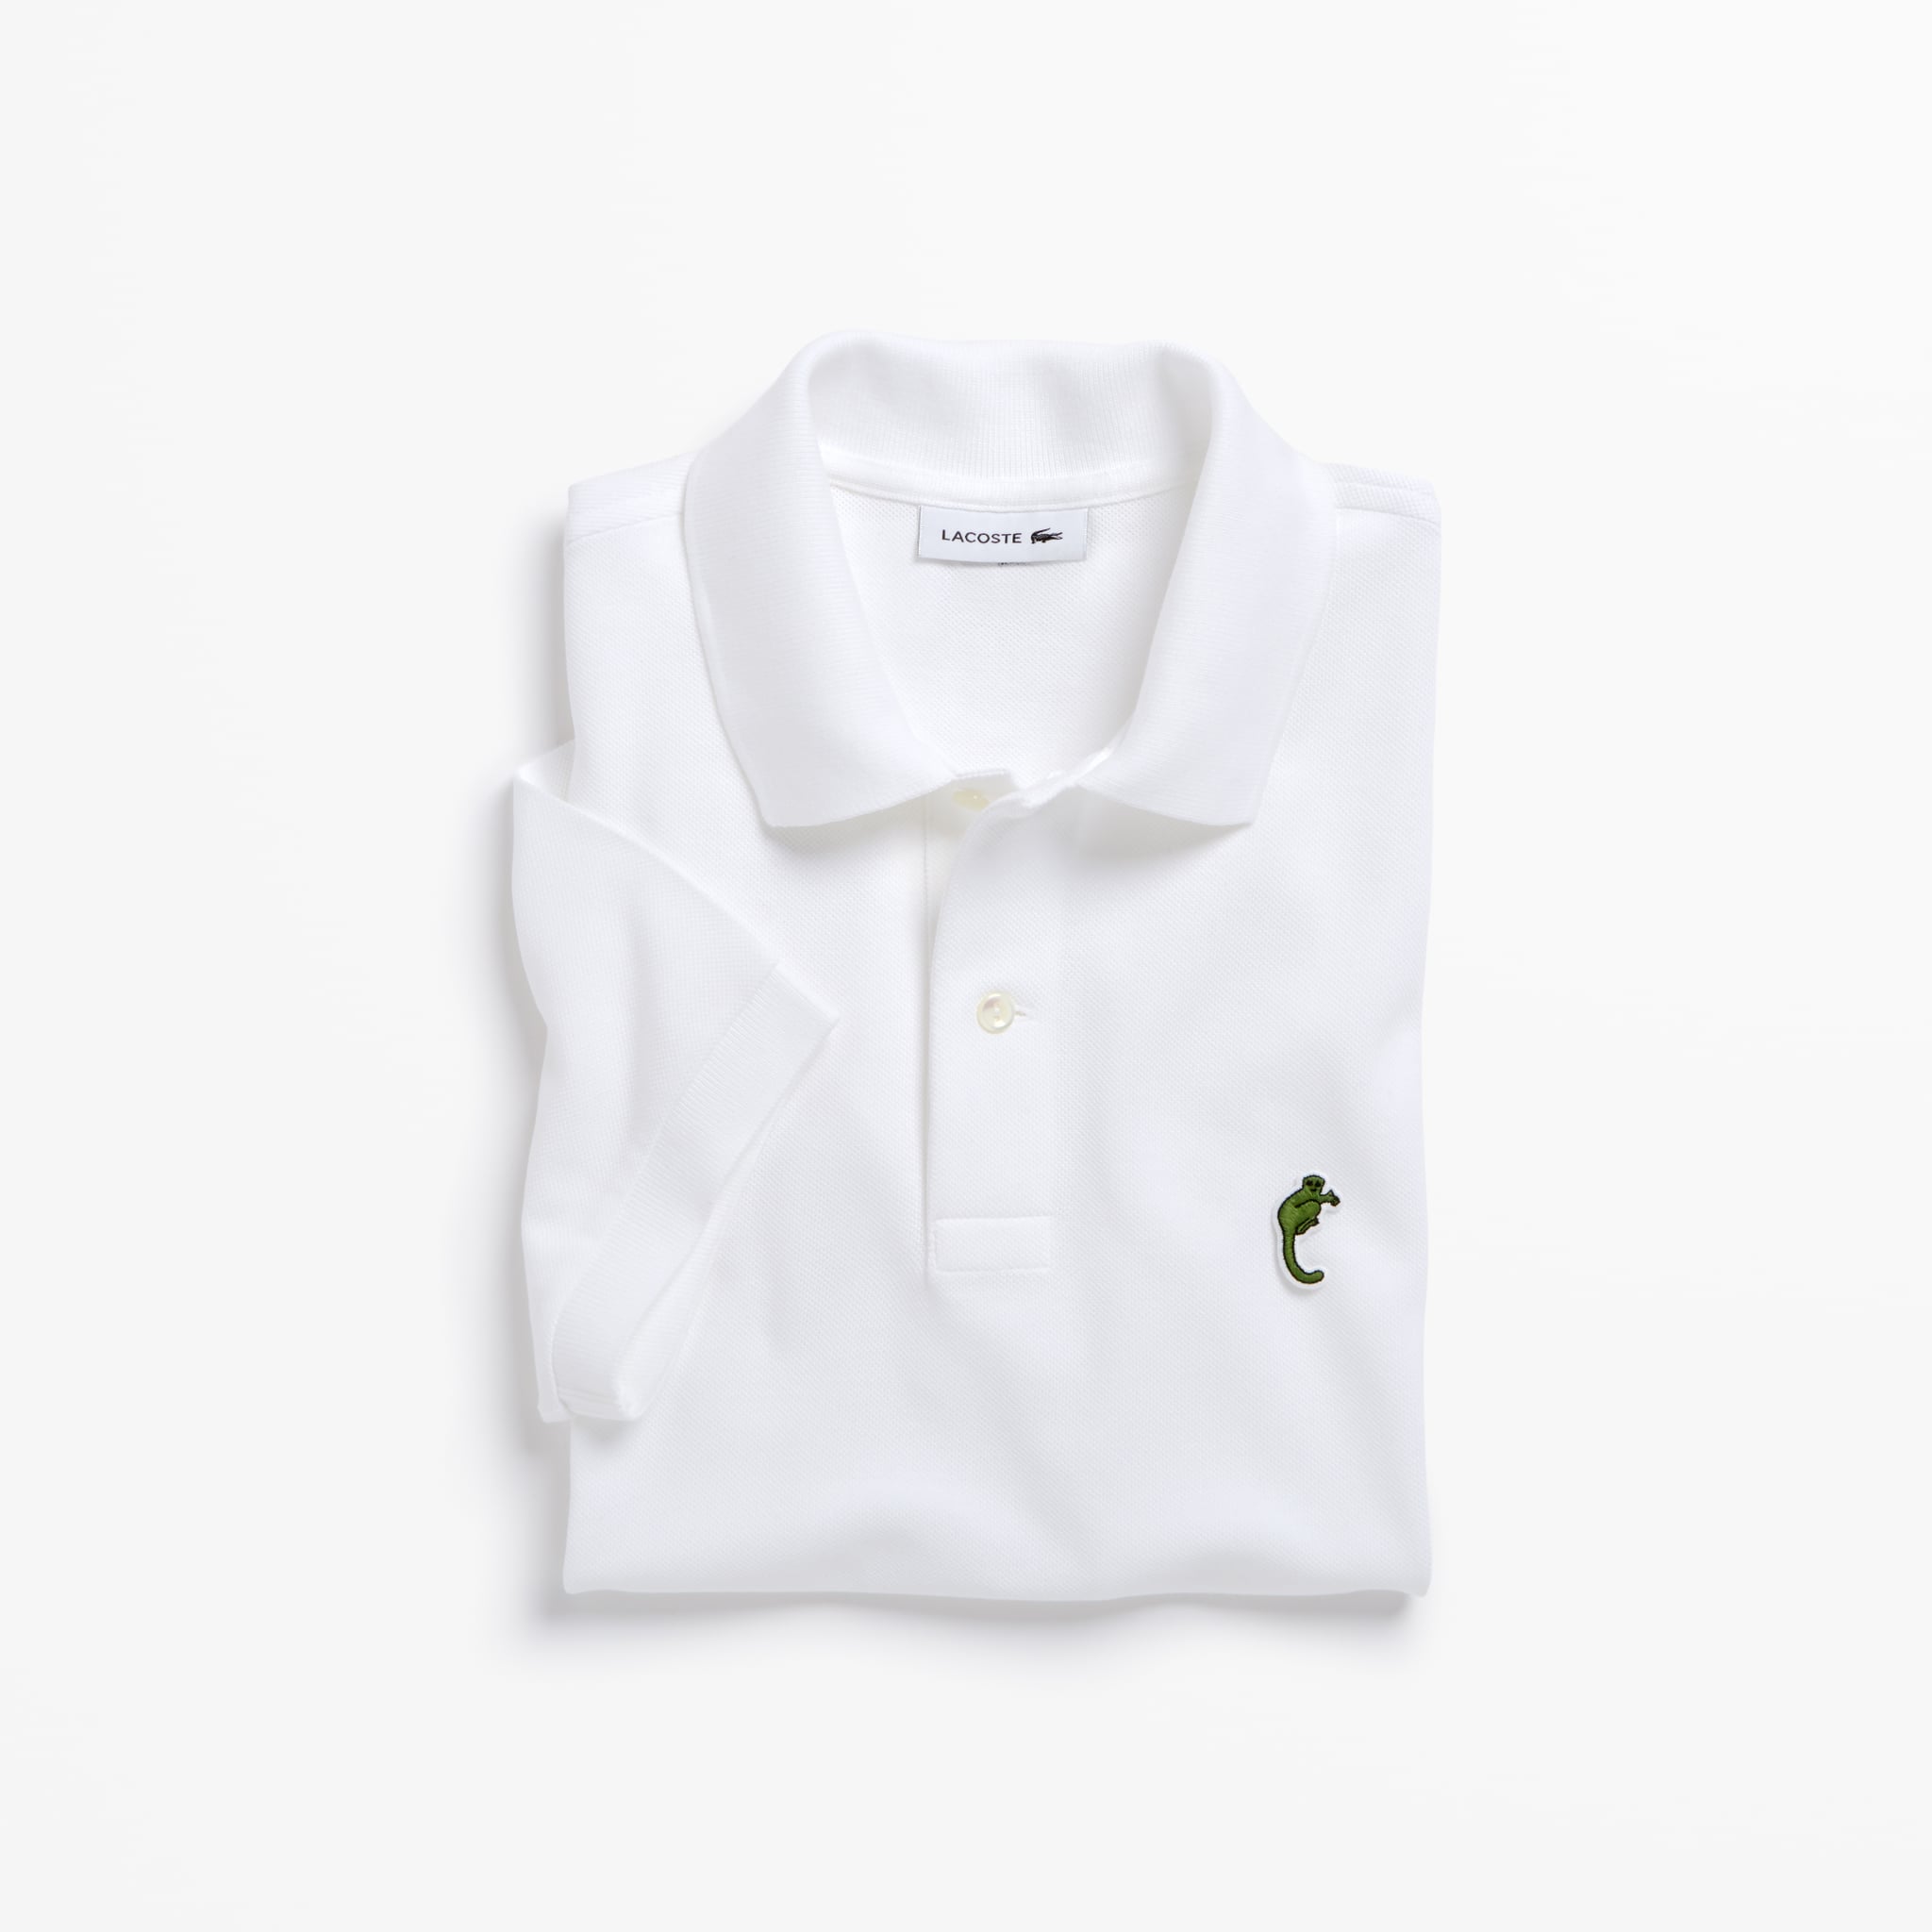 Lacoste Replace Their Iconic Crocodile Logo With Endangered